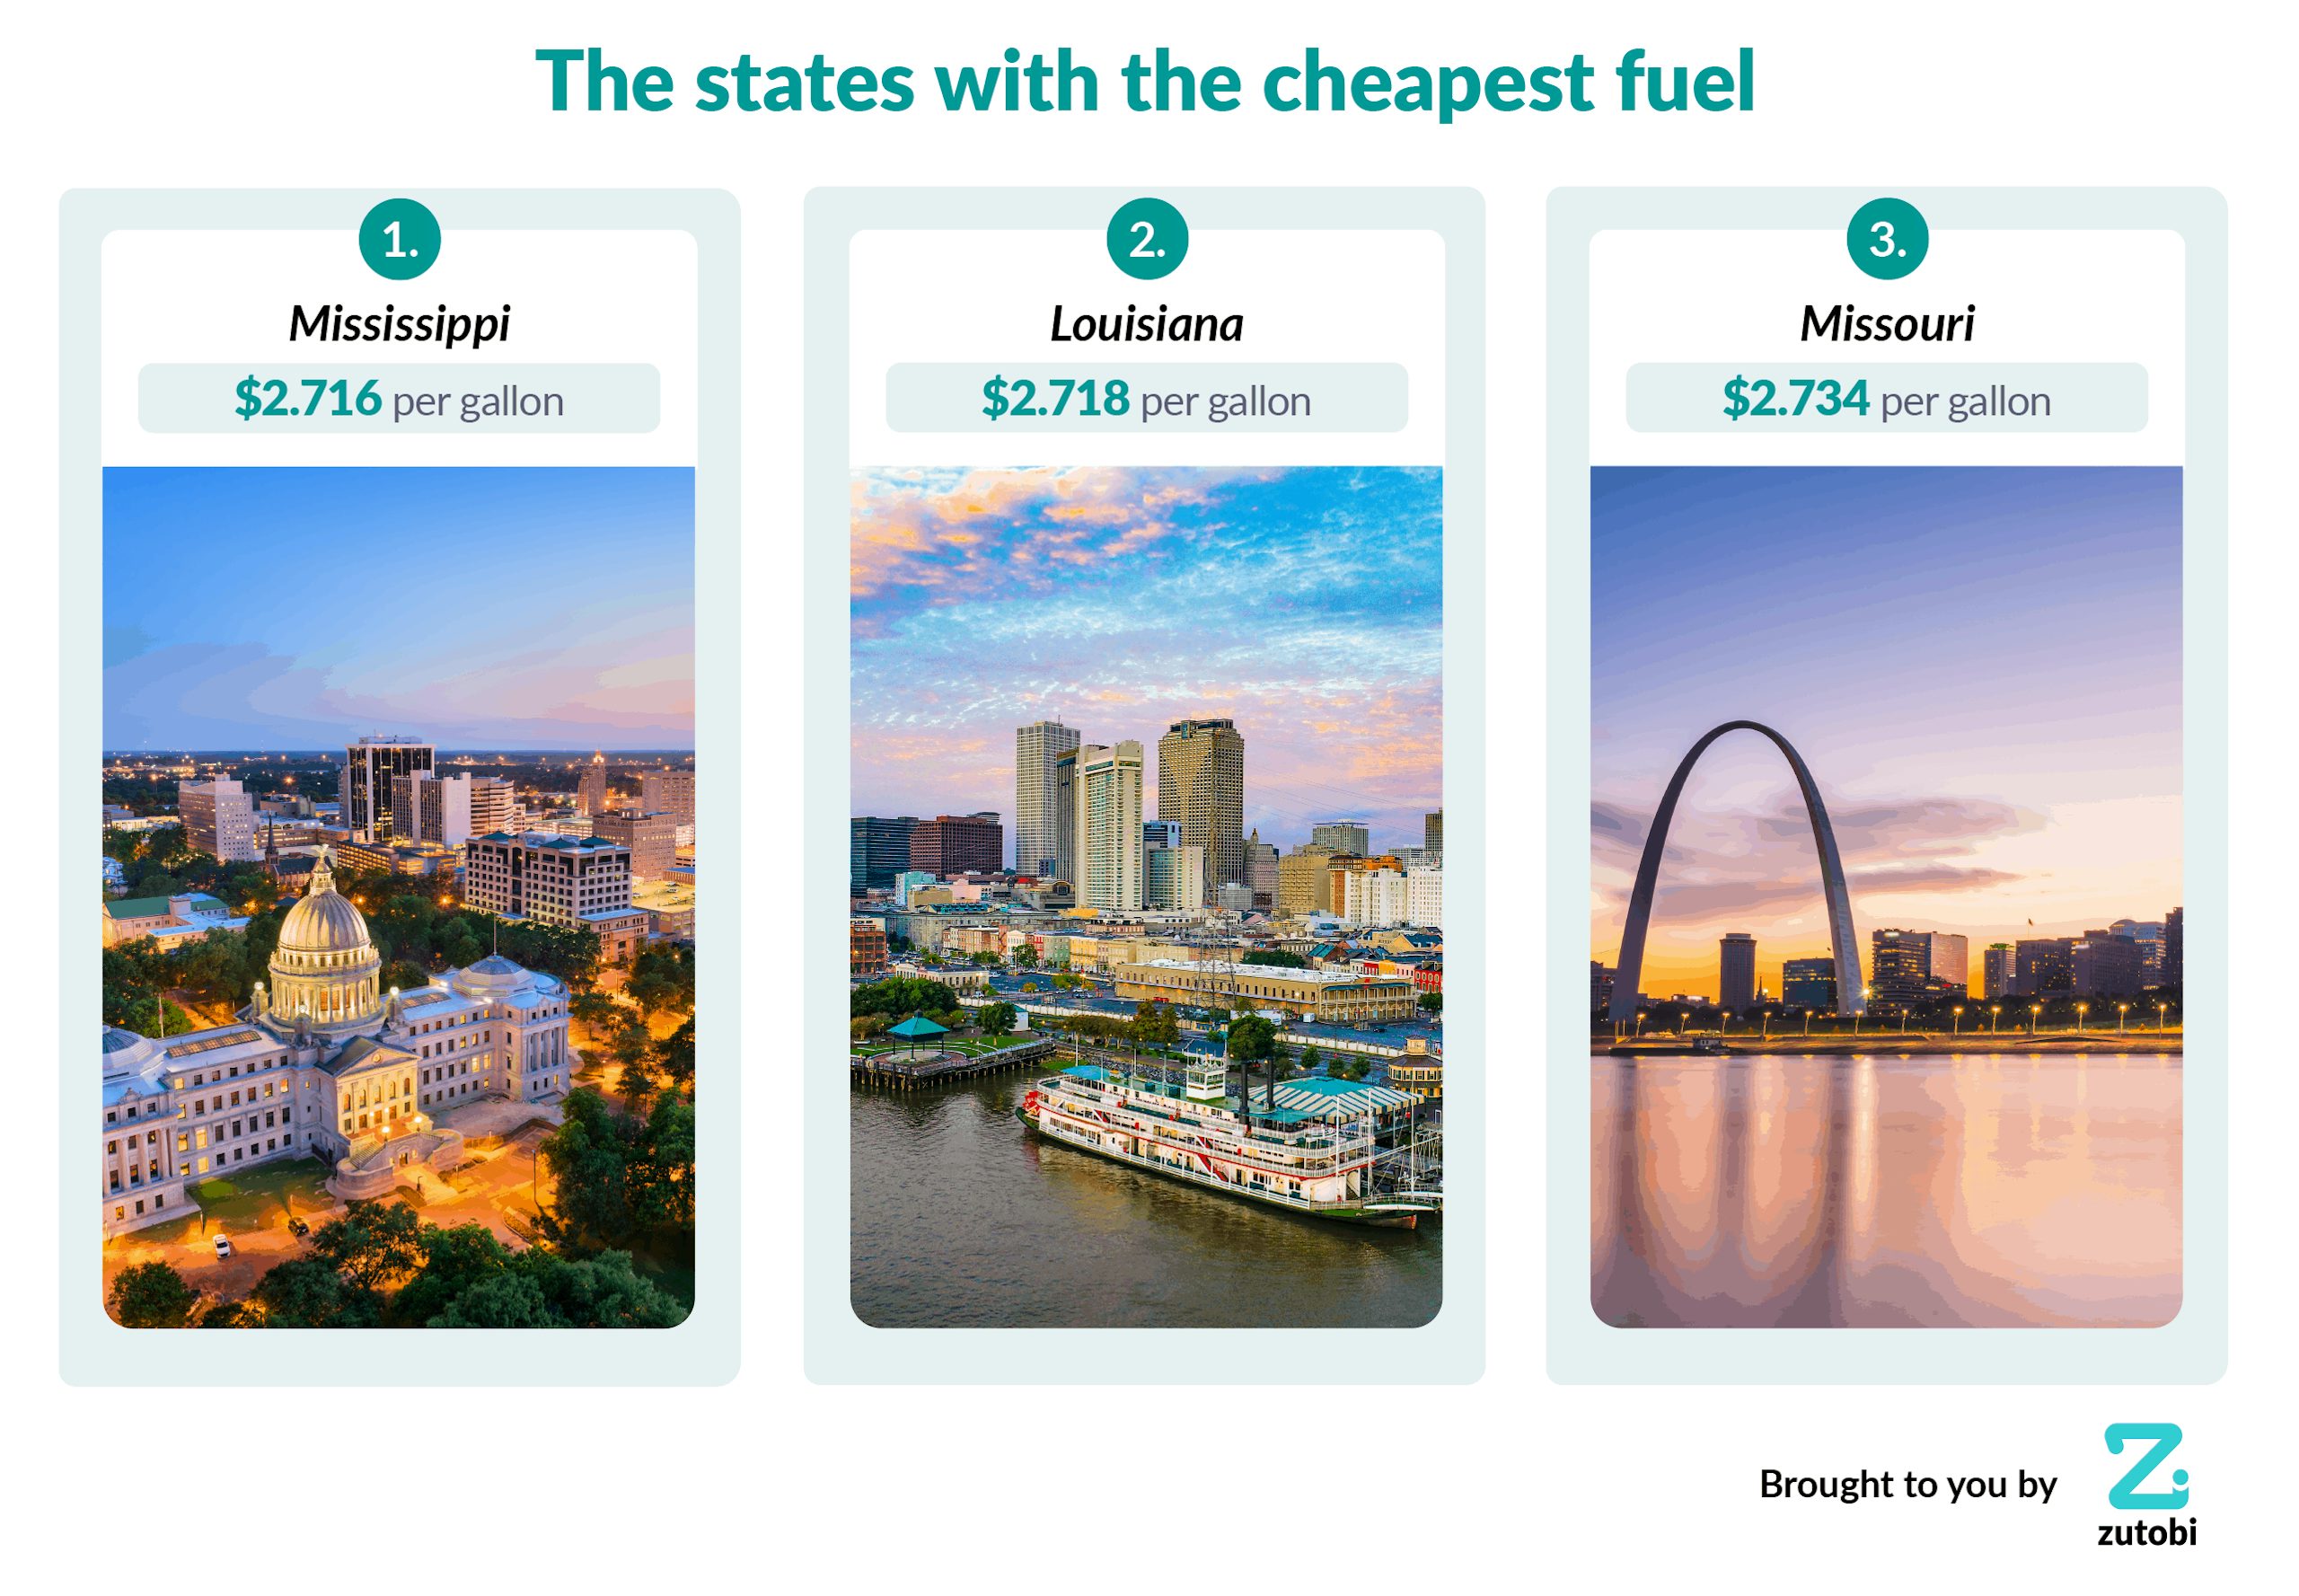 The states with the cheapest gasoline